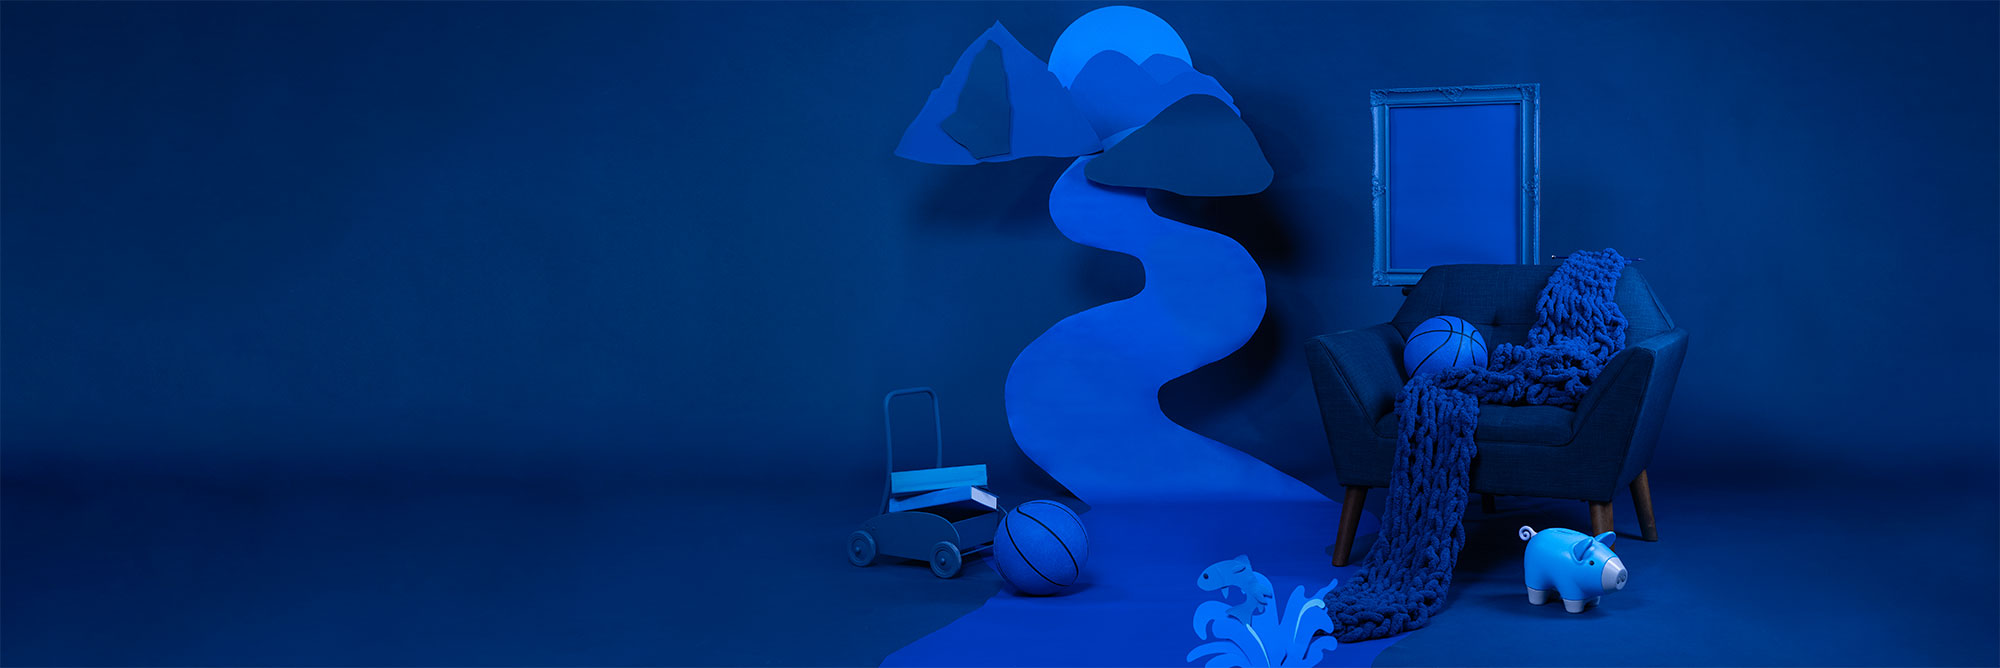 A blue background with a chair, backetball, picture frame, children's toys and scarf: all blue. A mountain scene with a river is cut out of different shades of blue paper and hung in the background.